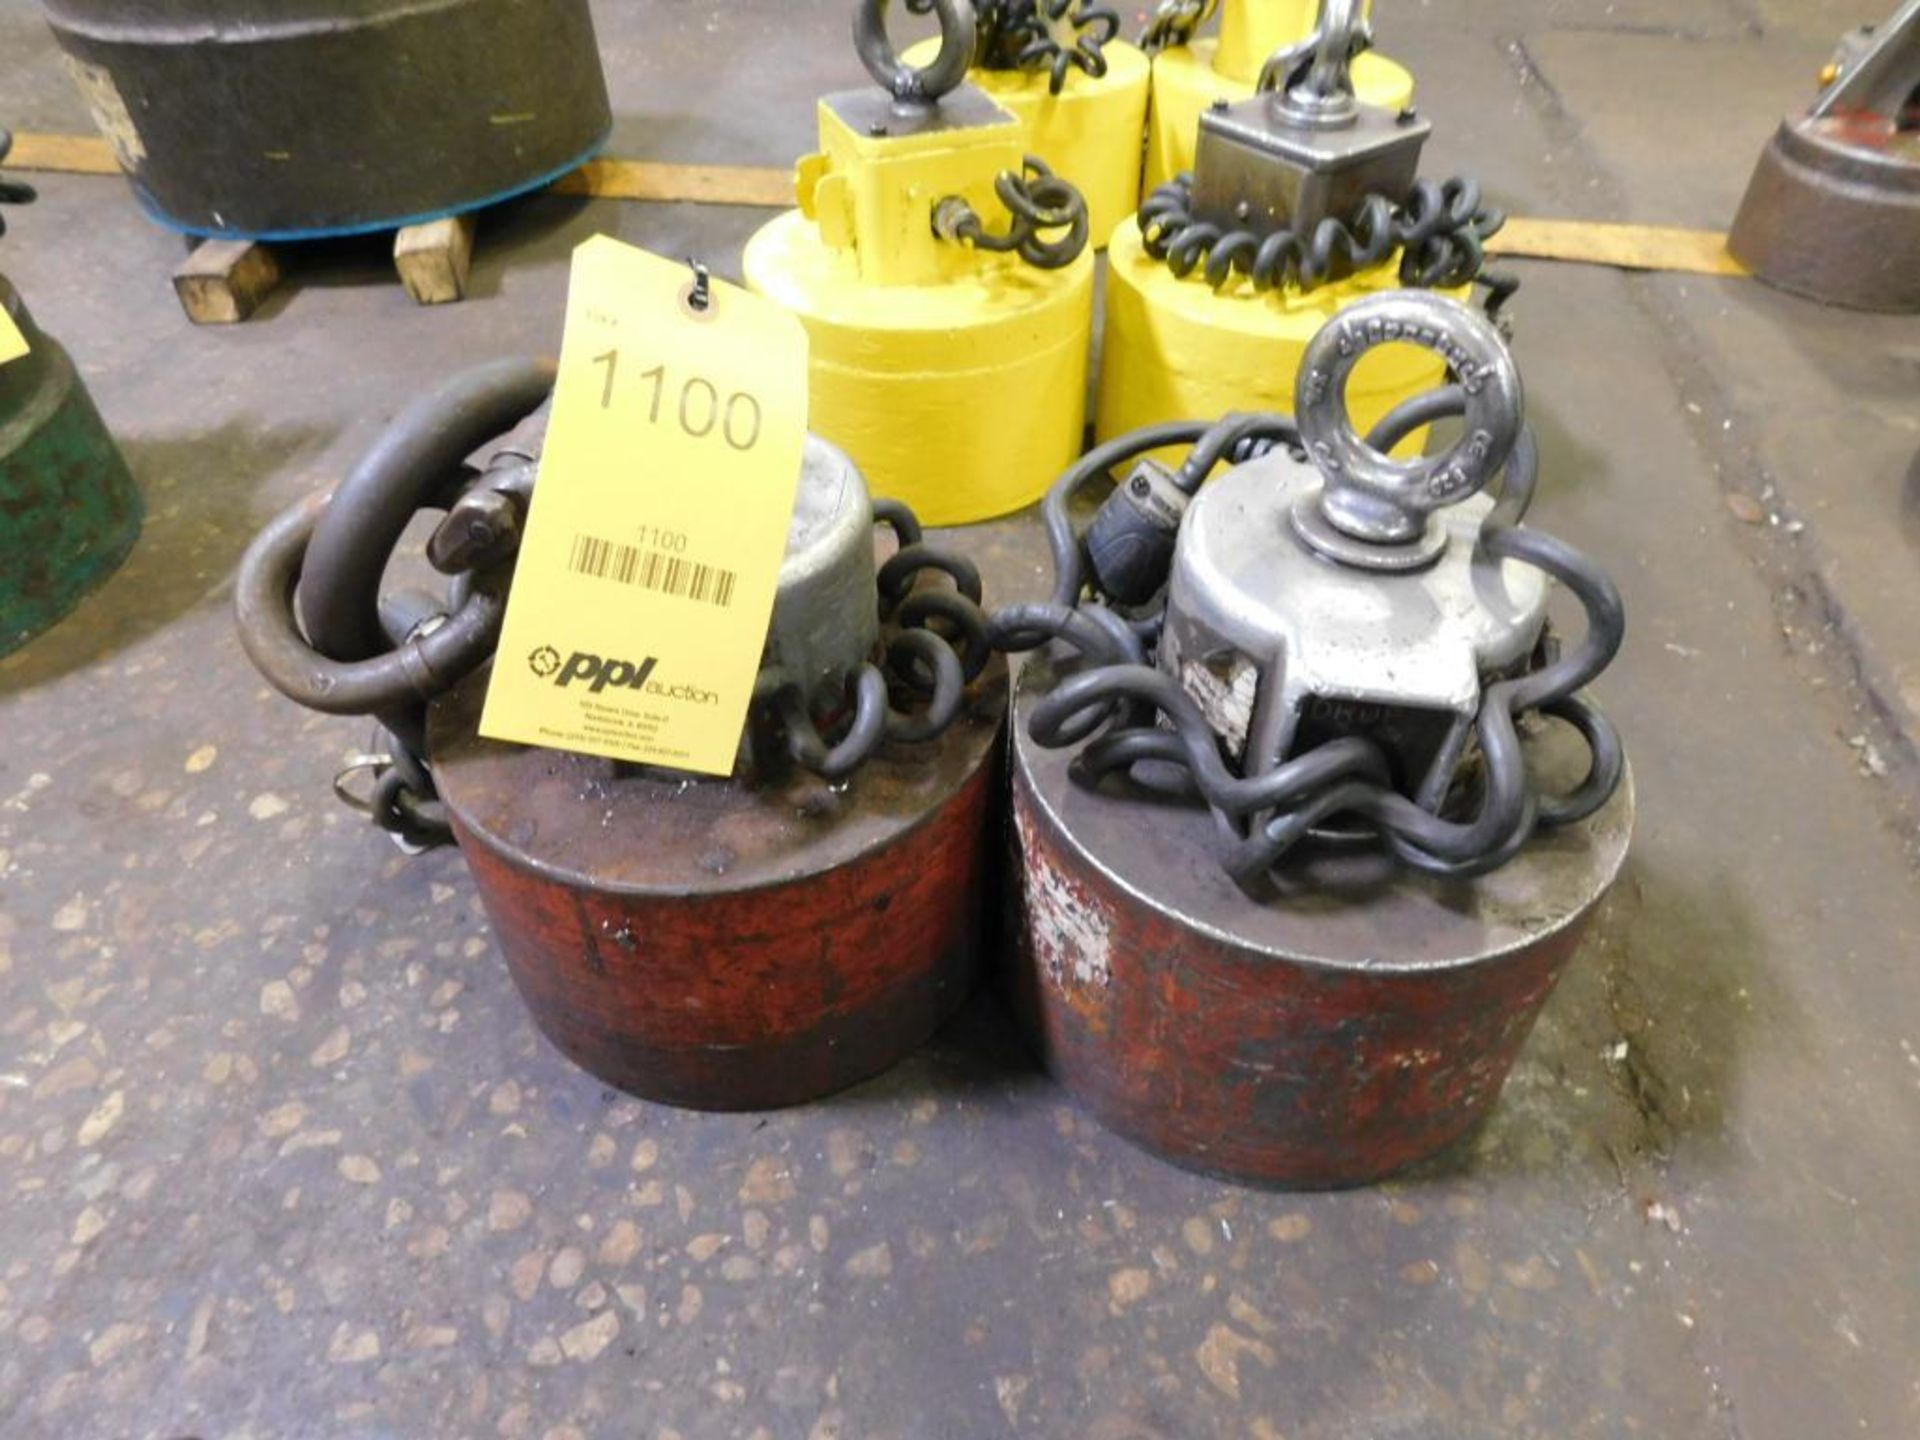 LOT: (2) 2,400 Lb. (approx.) Electromagnetic Lifting Magnets